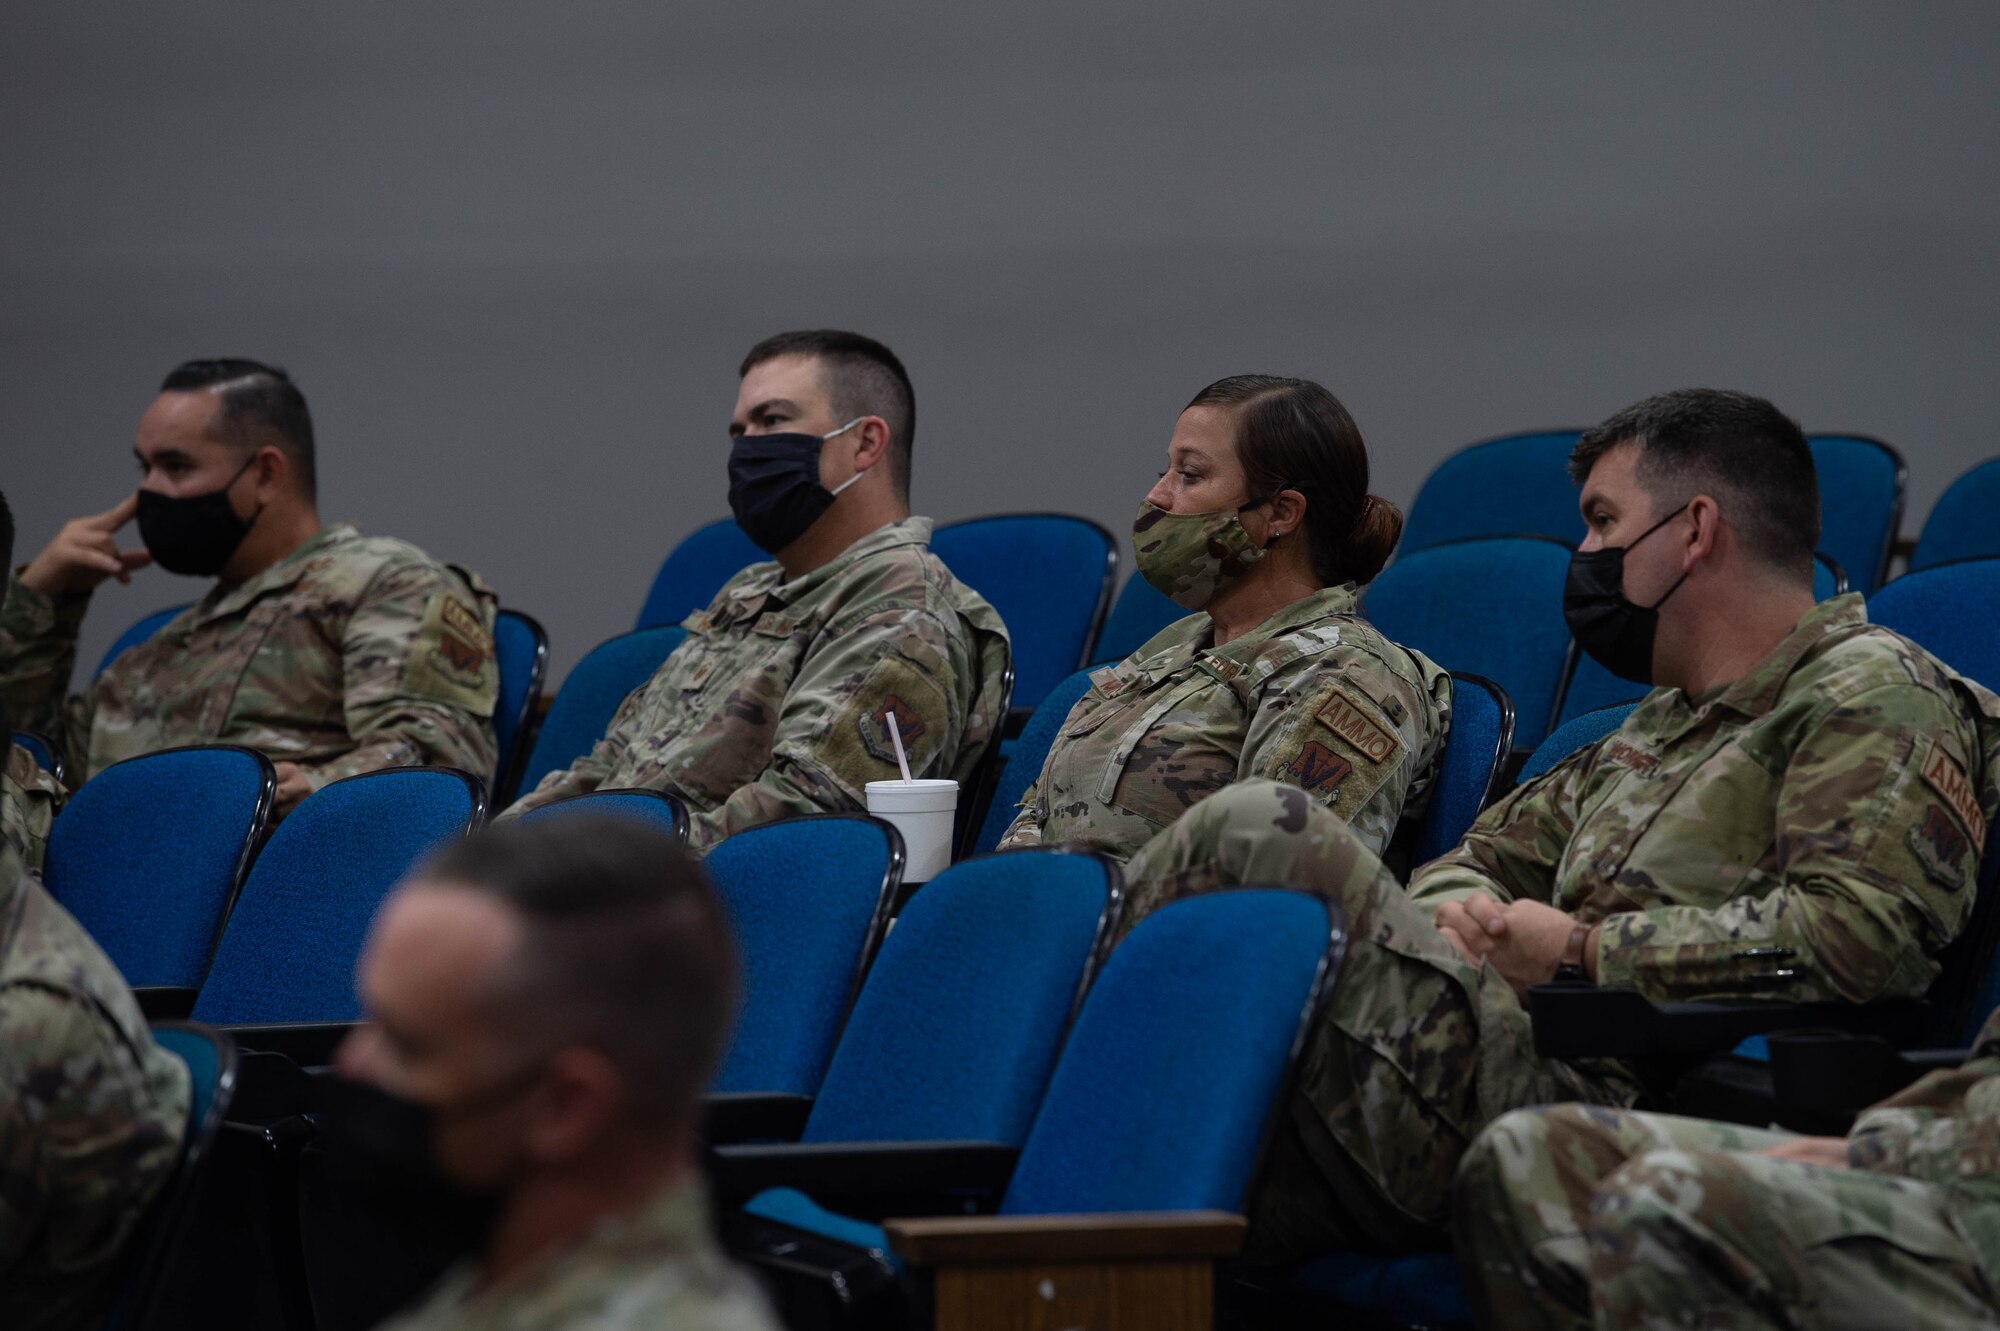 A photo of Airmen sitting.